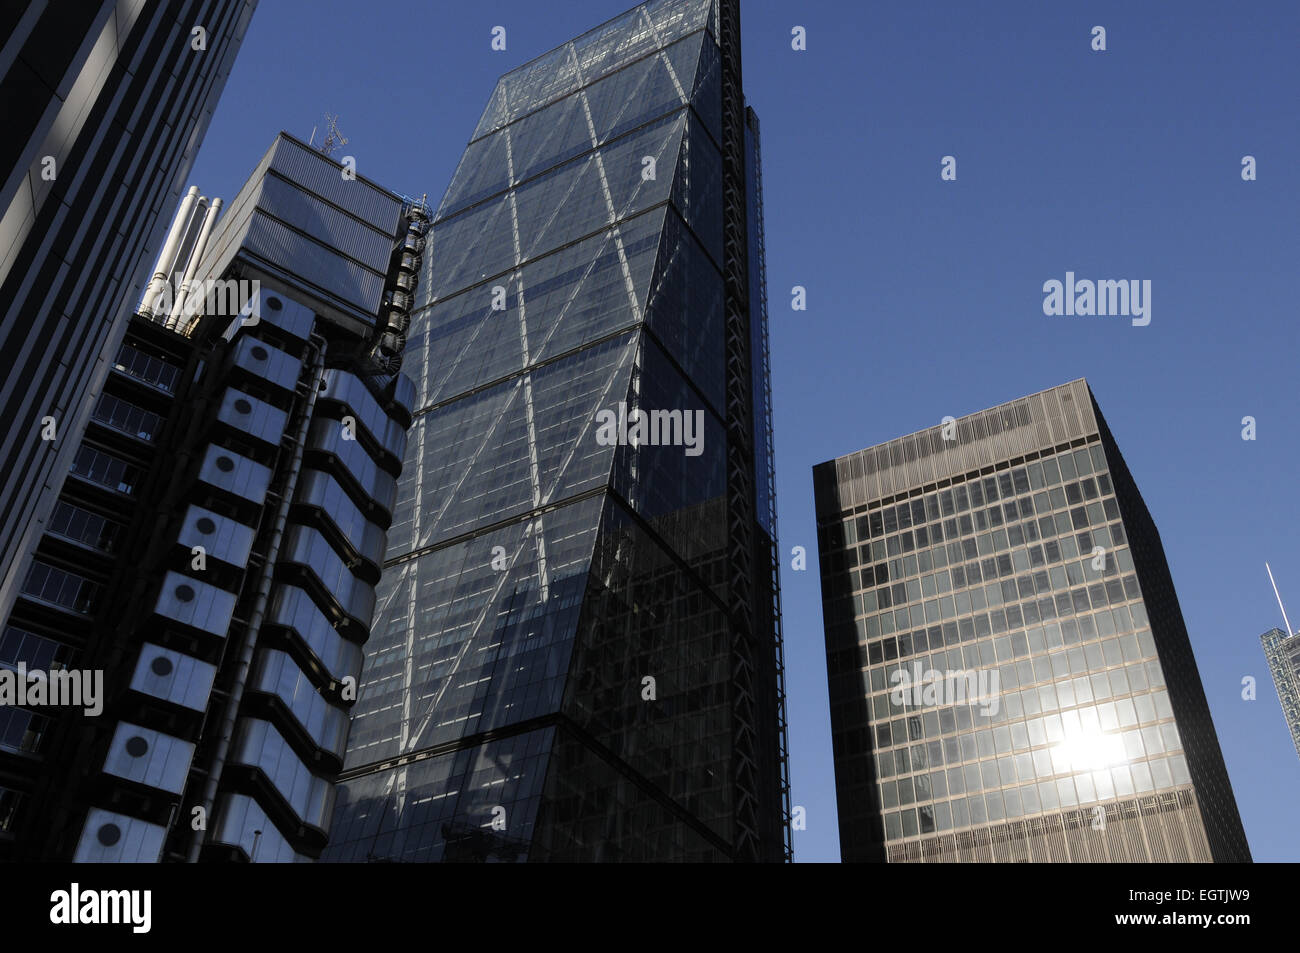 The Modern skyline of the City of London with The Cheesegrater and Lloyds of London Buildings London England Stock Photo